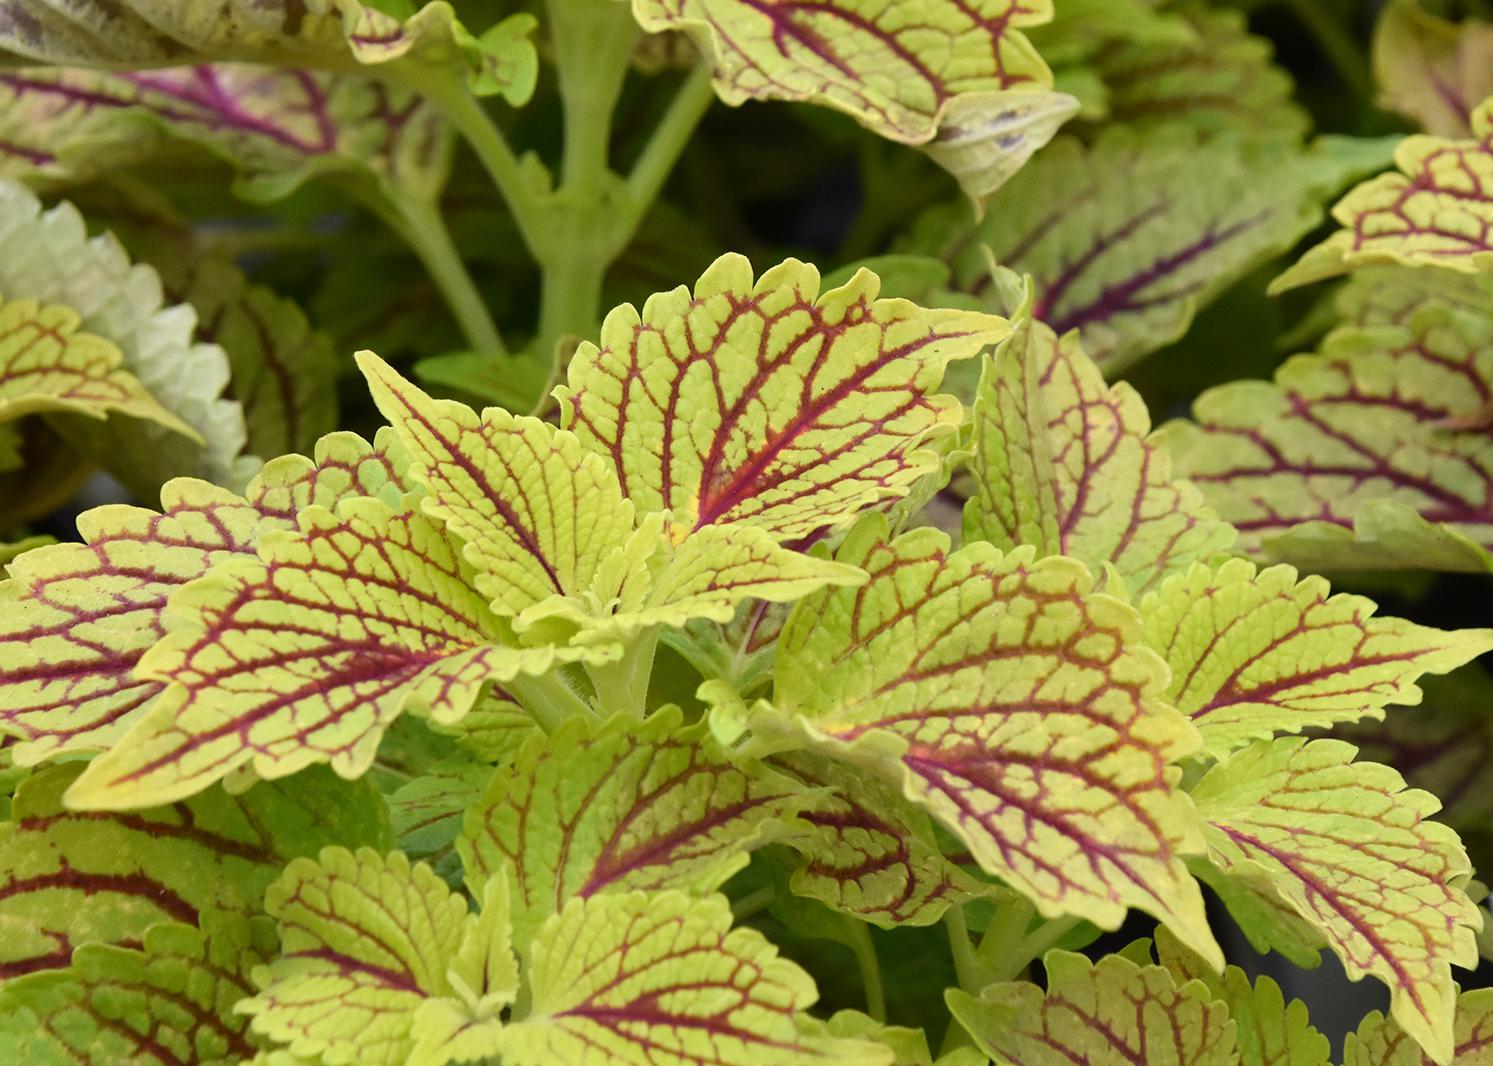 Maroon veins stand out on a sea of chartreuse leaves.